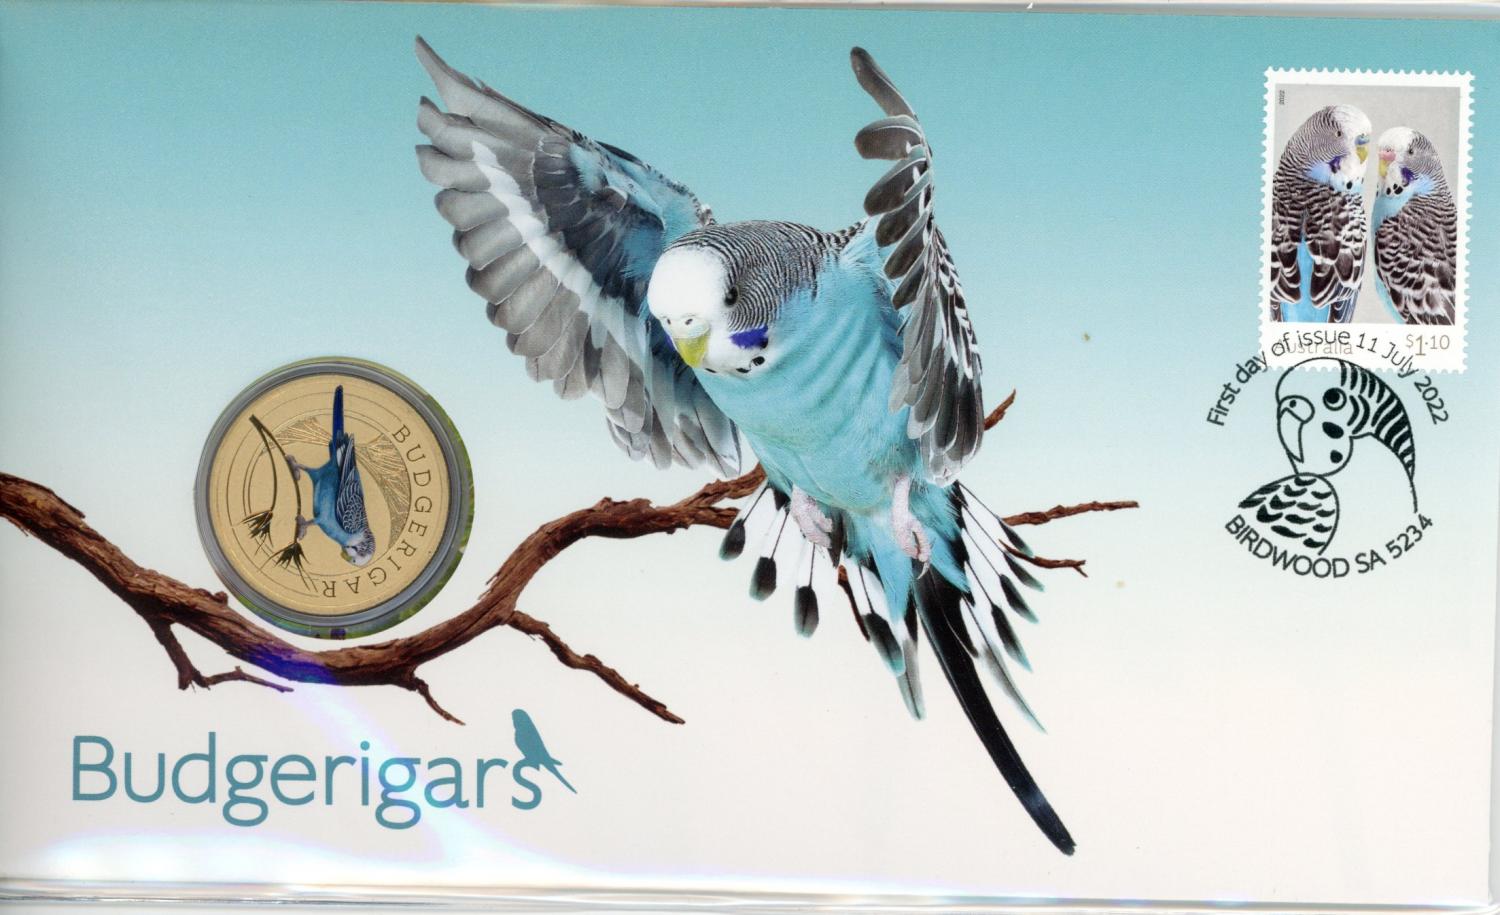 Thumbnail for 2022 Issue 16 Budgerigars PNC with Perth Mint Coloured Budgerigar $1 Coin